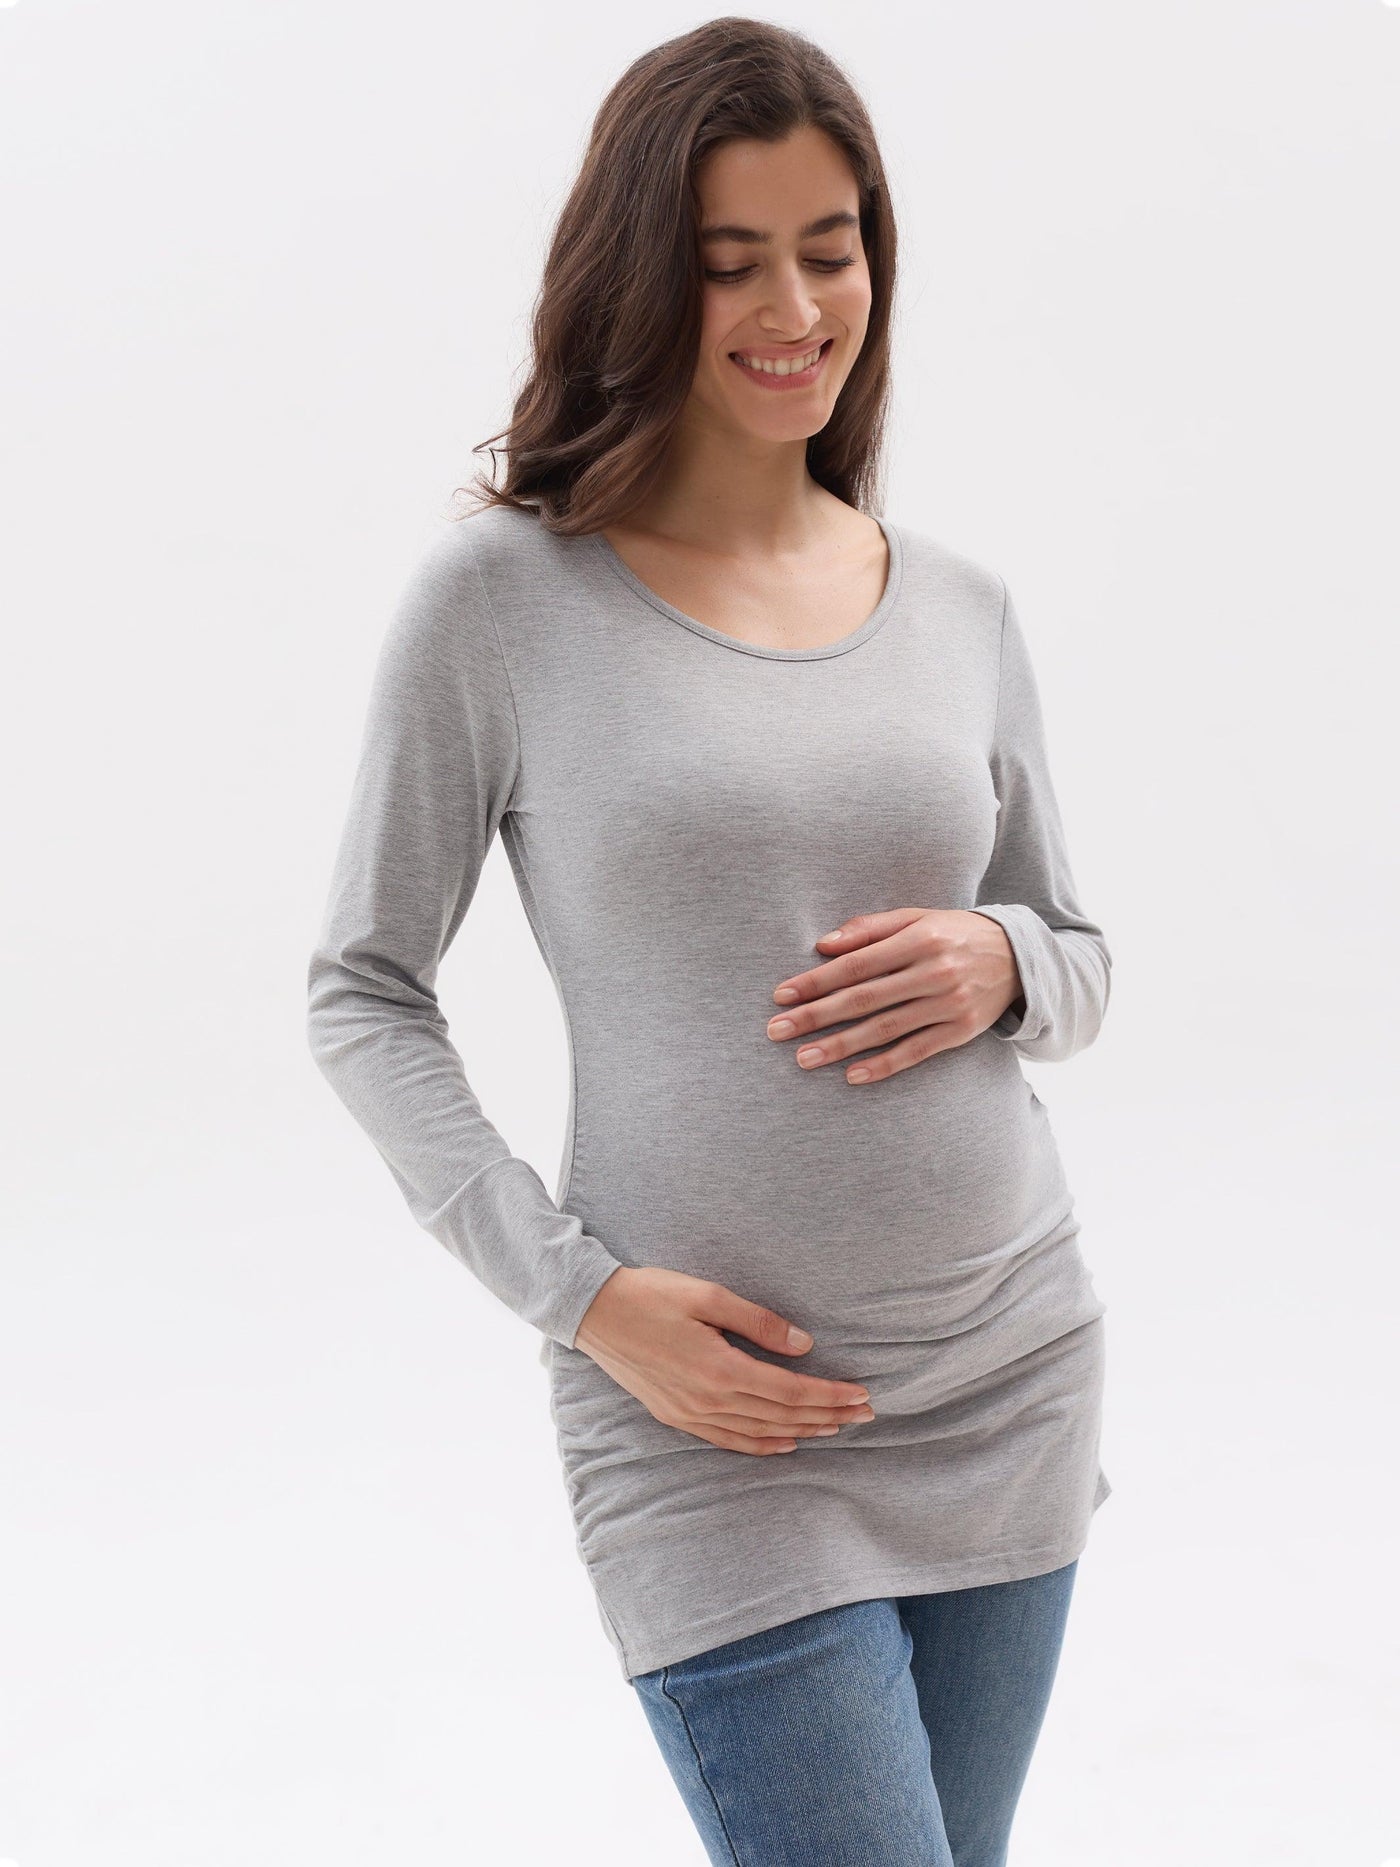 Pack of 3pcs Basic Long Sleeve Ruched Side Maternity Tops - Leolace